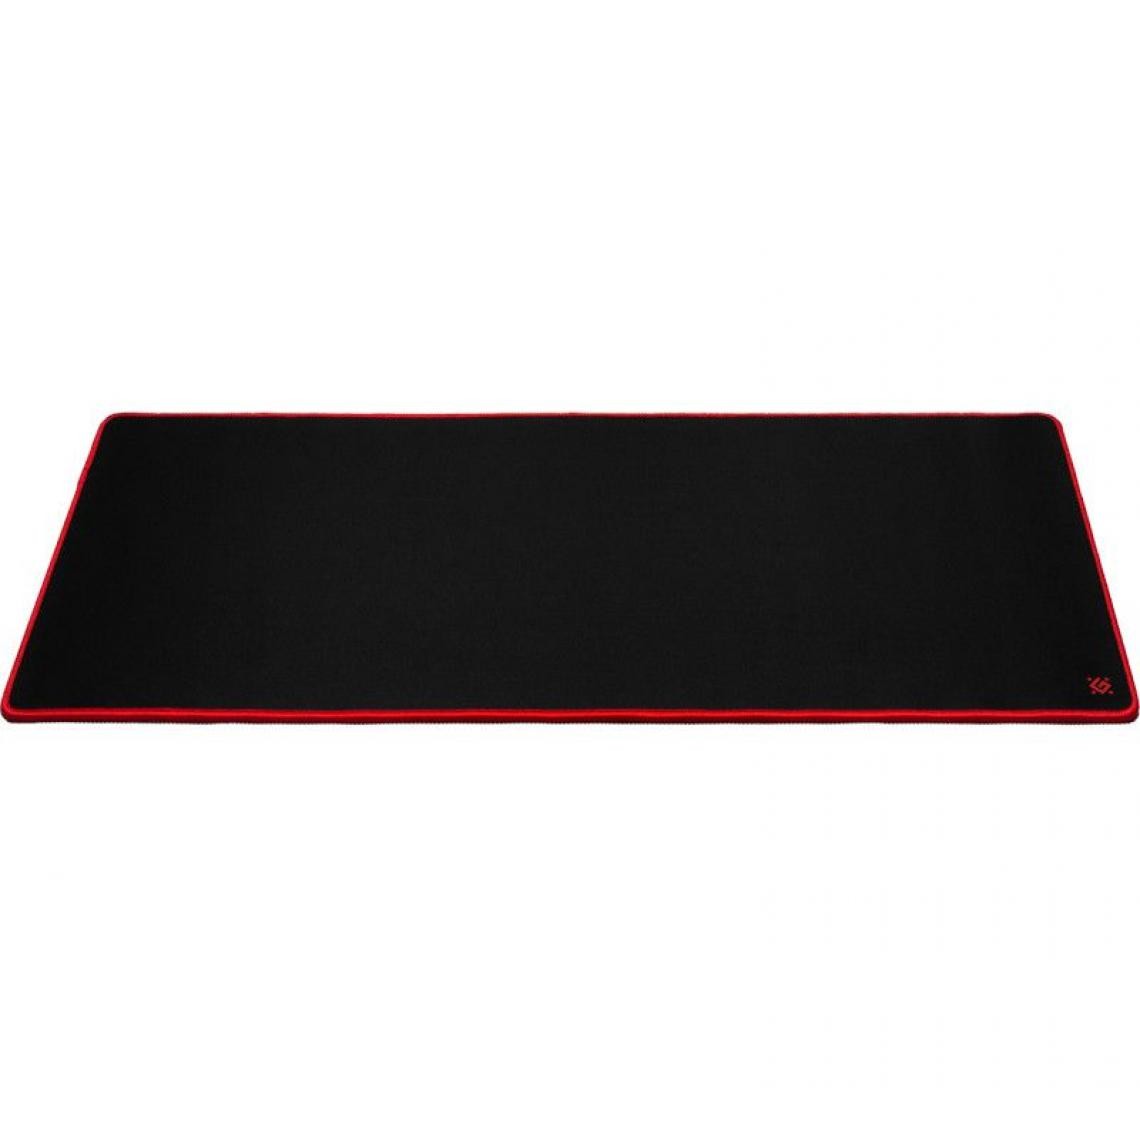 Defender - Gaming pad for mouse and keyboard DEFENDER GAMING BLACK ULTRA XXL 900x450x3mm - Tapis de souris